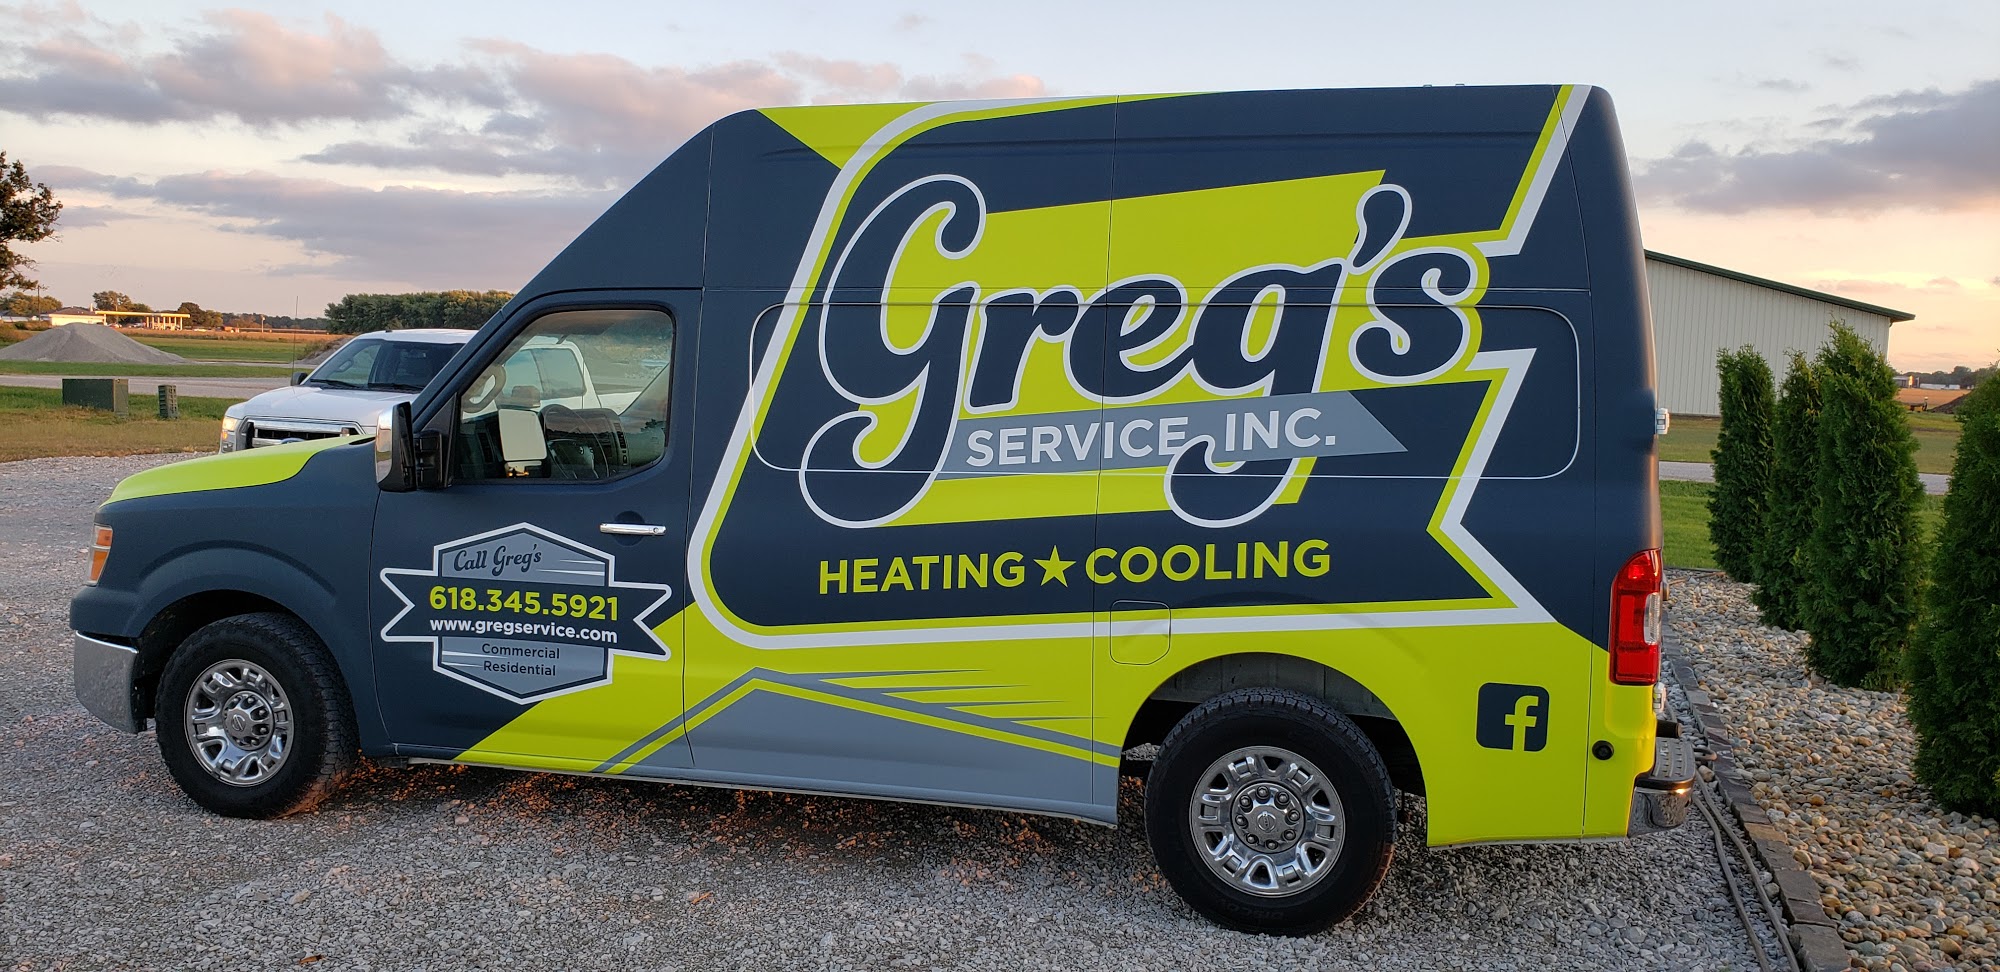 Greg's Service Inc. Heating & Cooling